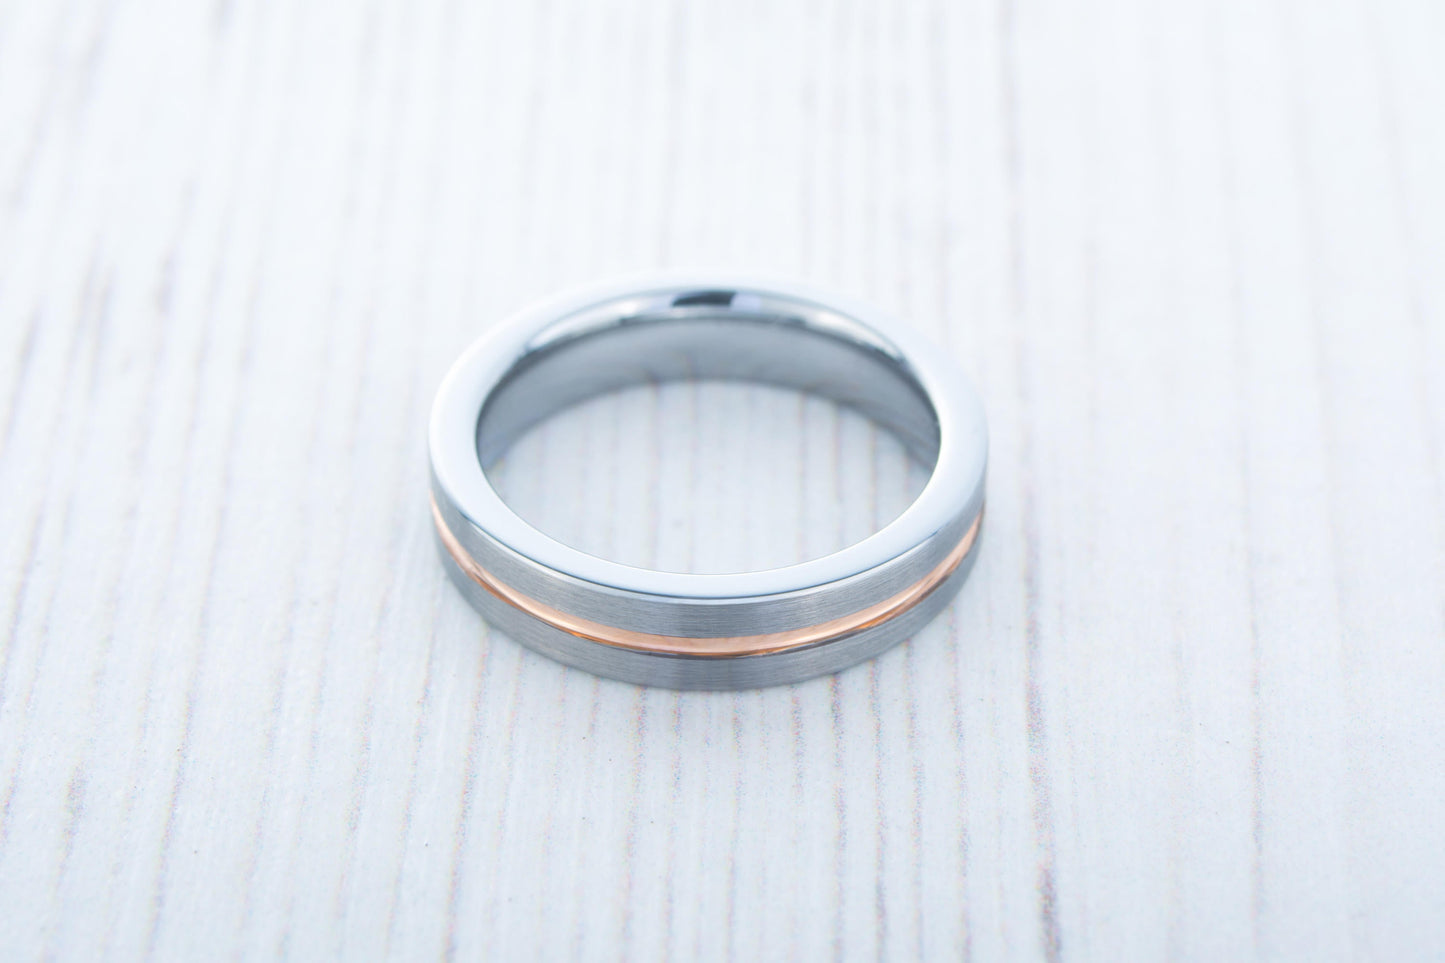 4mm 14K Rose Gold and Brushed Titanium Couples Wedding ring band for men and women